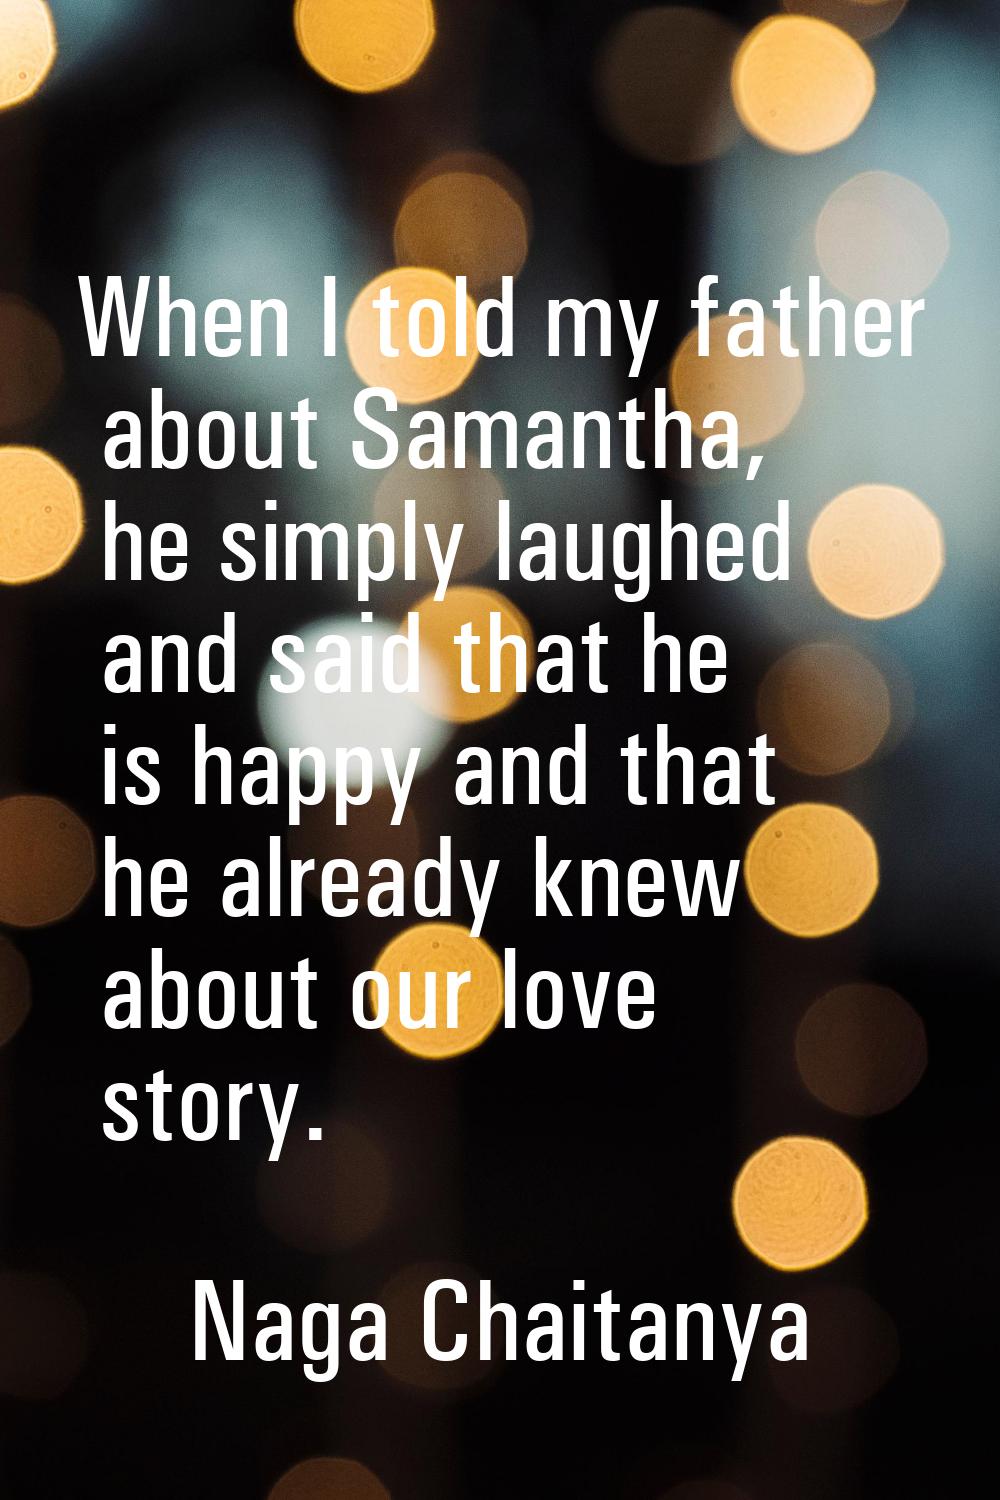 When I told my father about Samantha, he simply laughed and said that he is happy and that he alrea